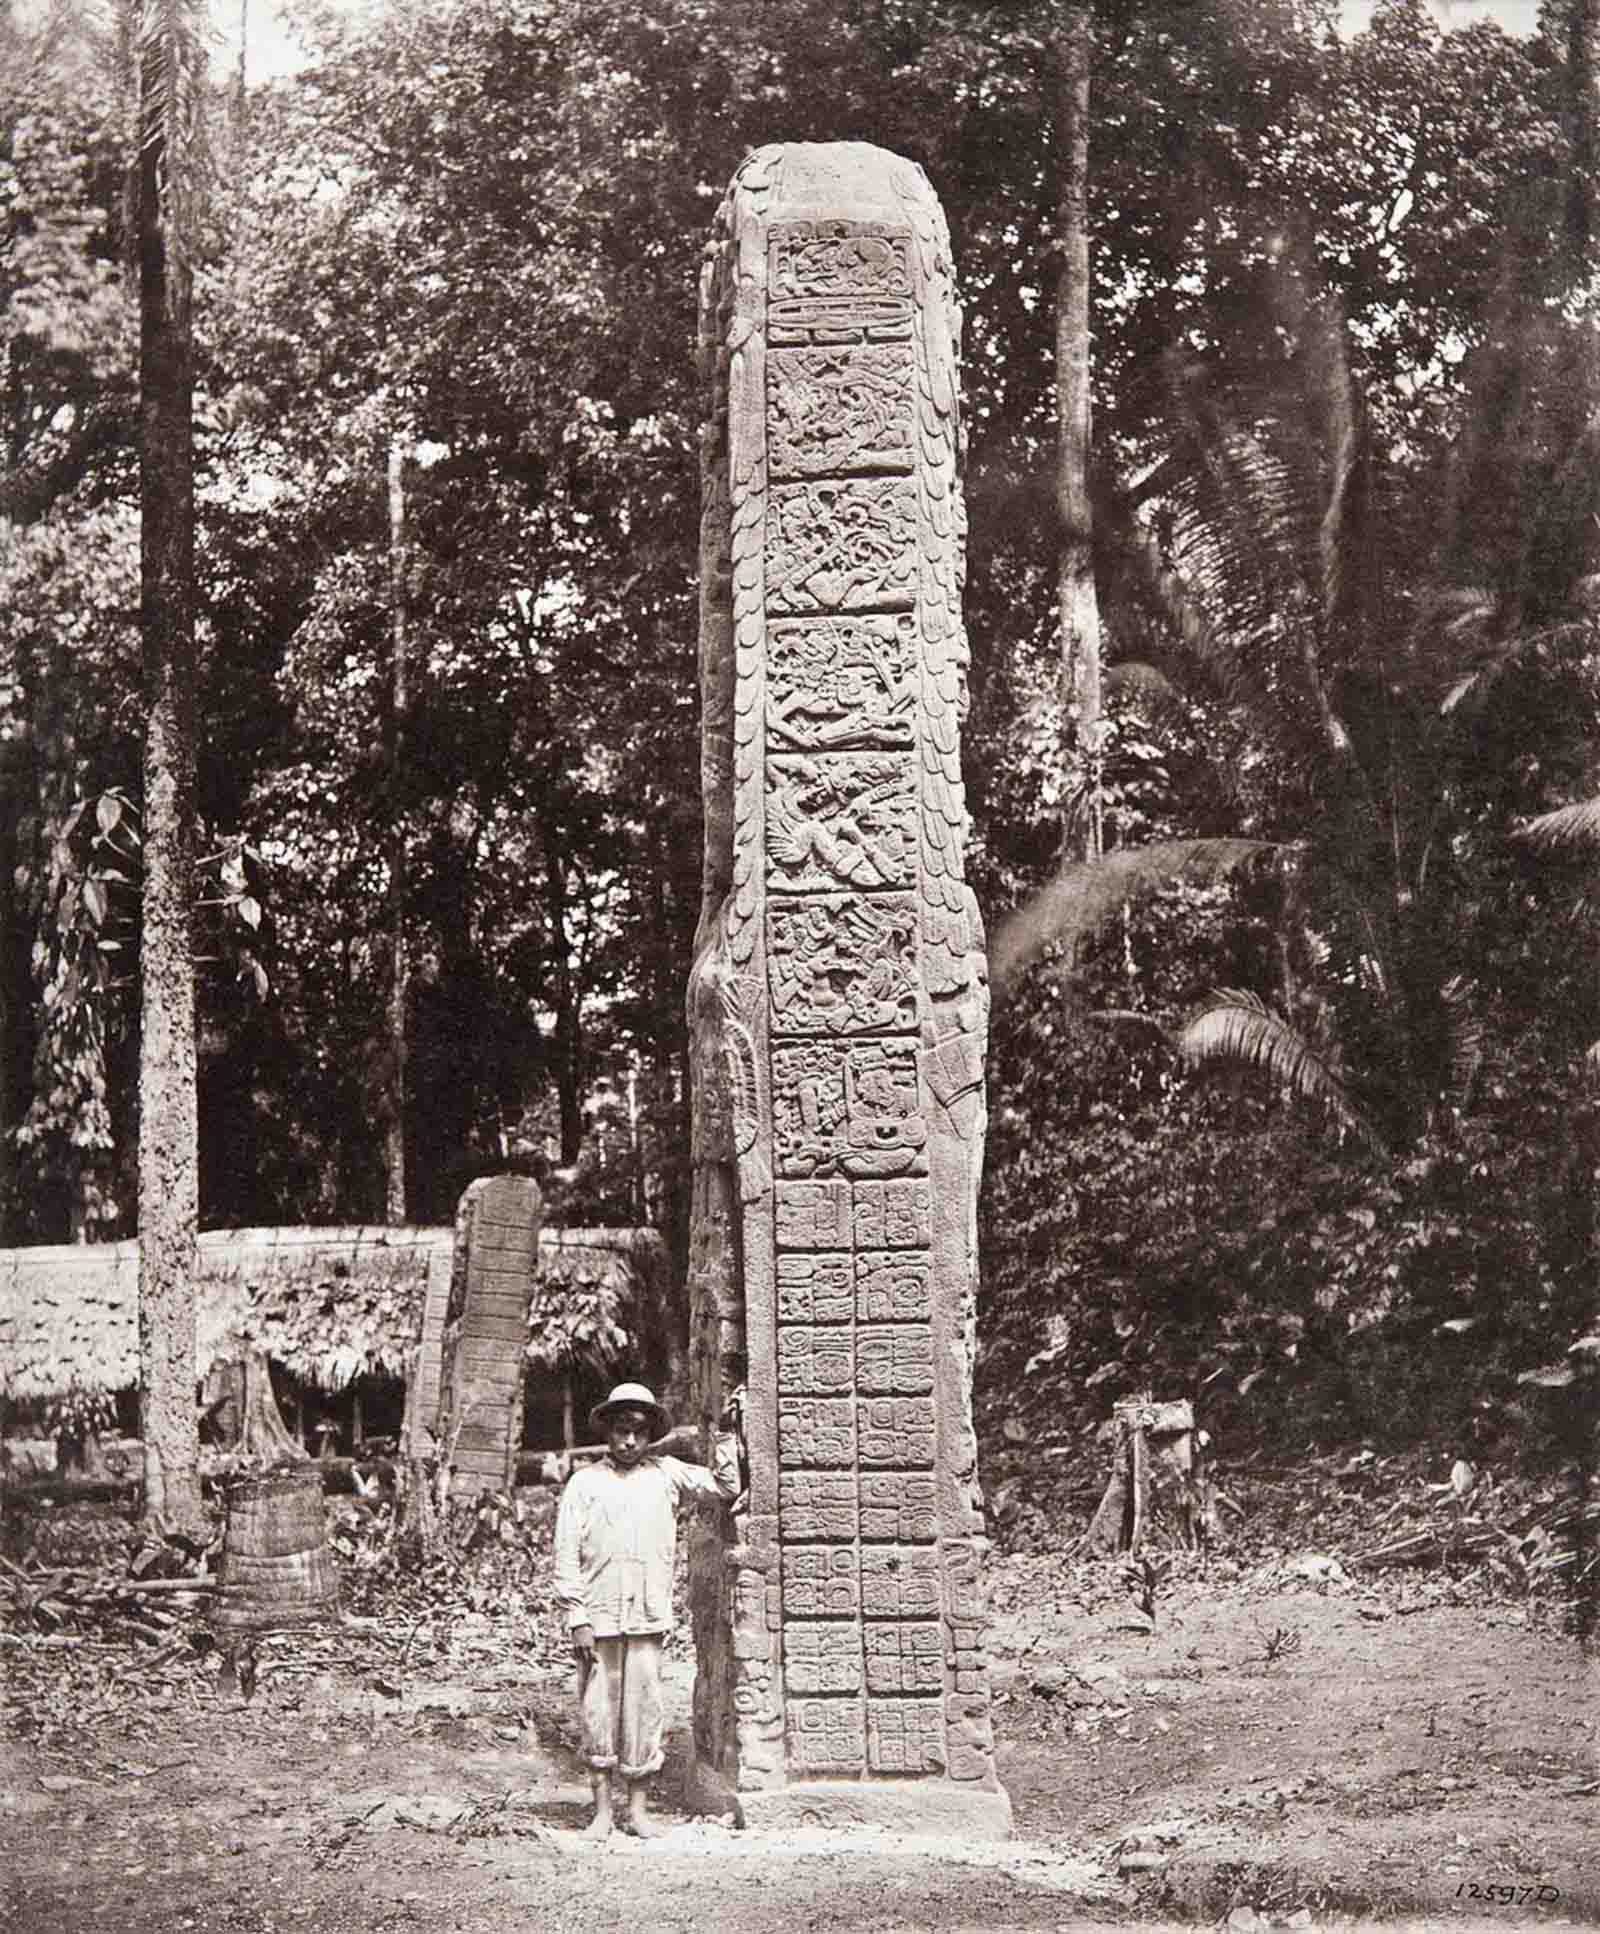 Stela D (also known as Monument 4), dated AD 766. “The inscription on each side of the Stela is headed by an initial series of six squares of picture-writing”, Alfred Maudslay noted of this monument.